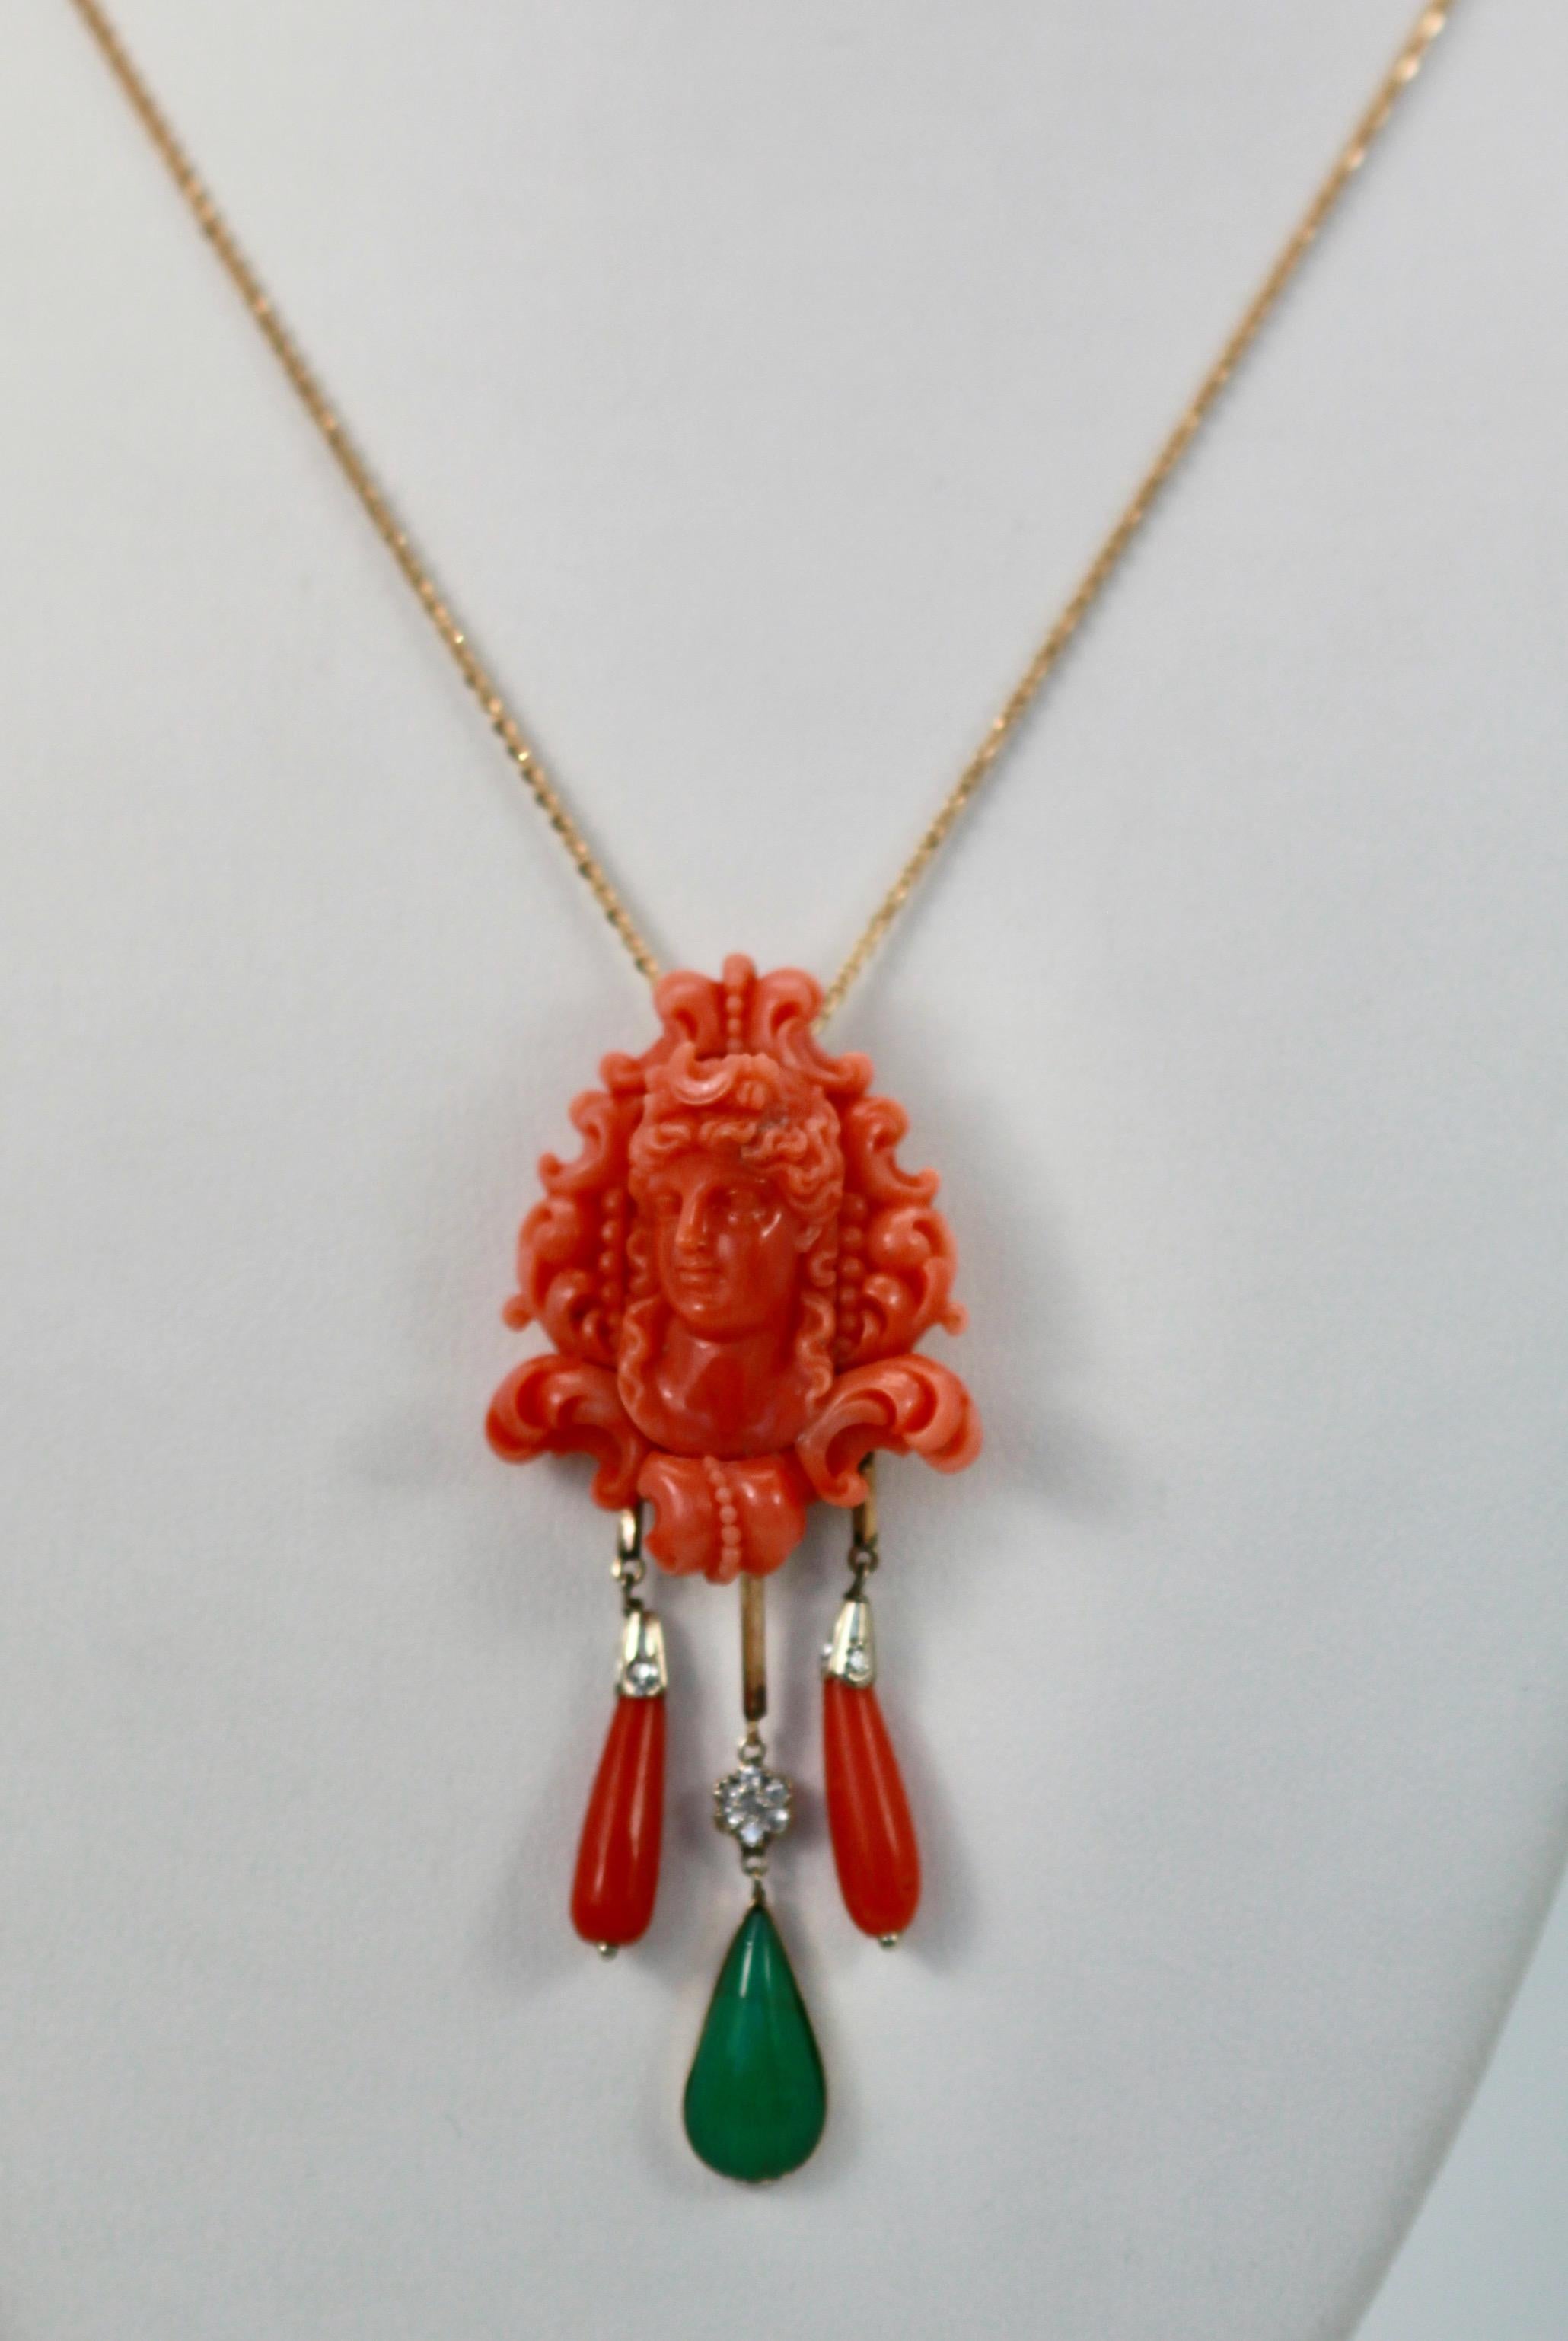 Women's Carved Coral Brooch Pendant W/ Coral Drops and Crystophase Drop For Sale